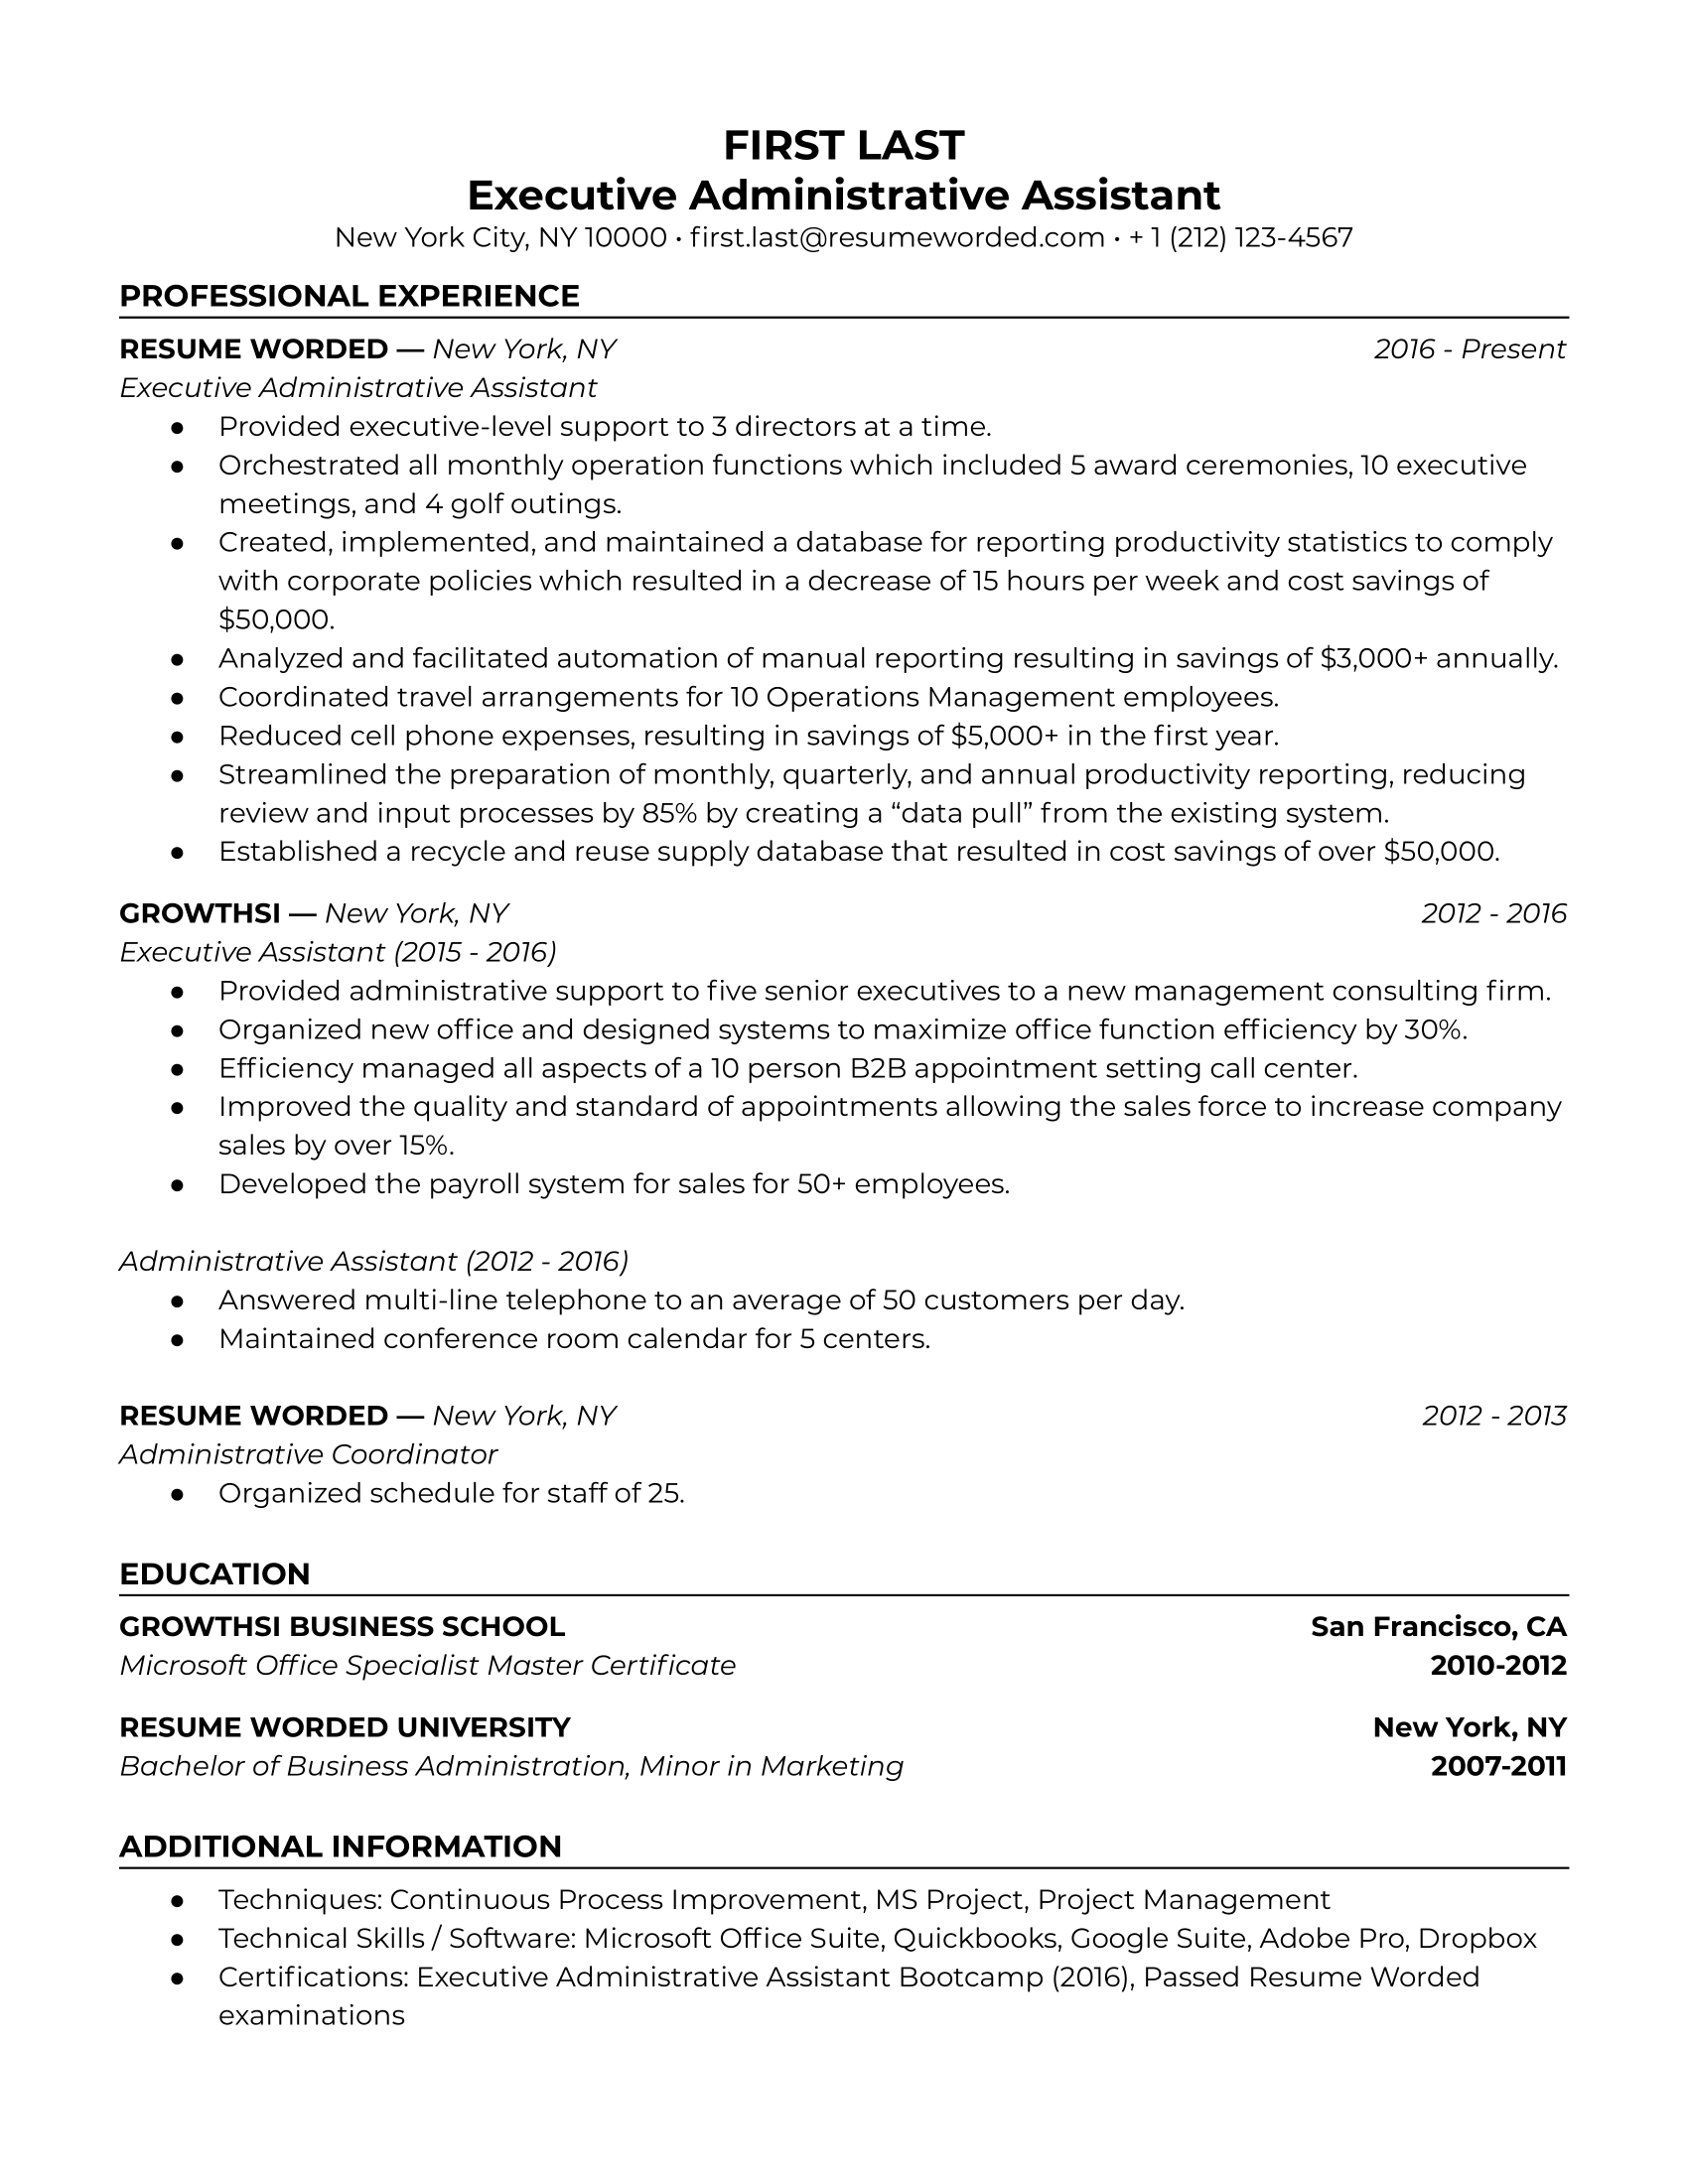 Executive Administrative Assistant Resume Template + Example